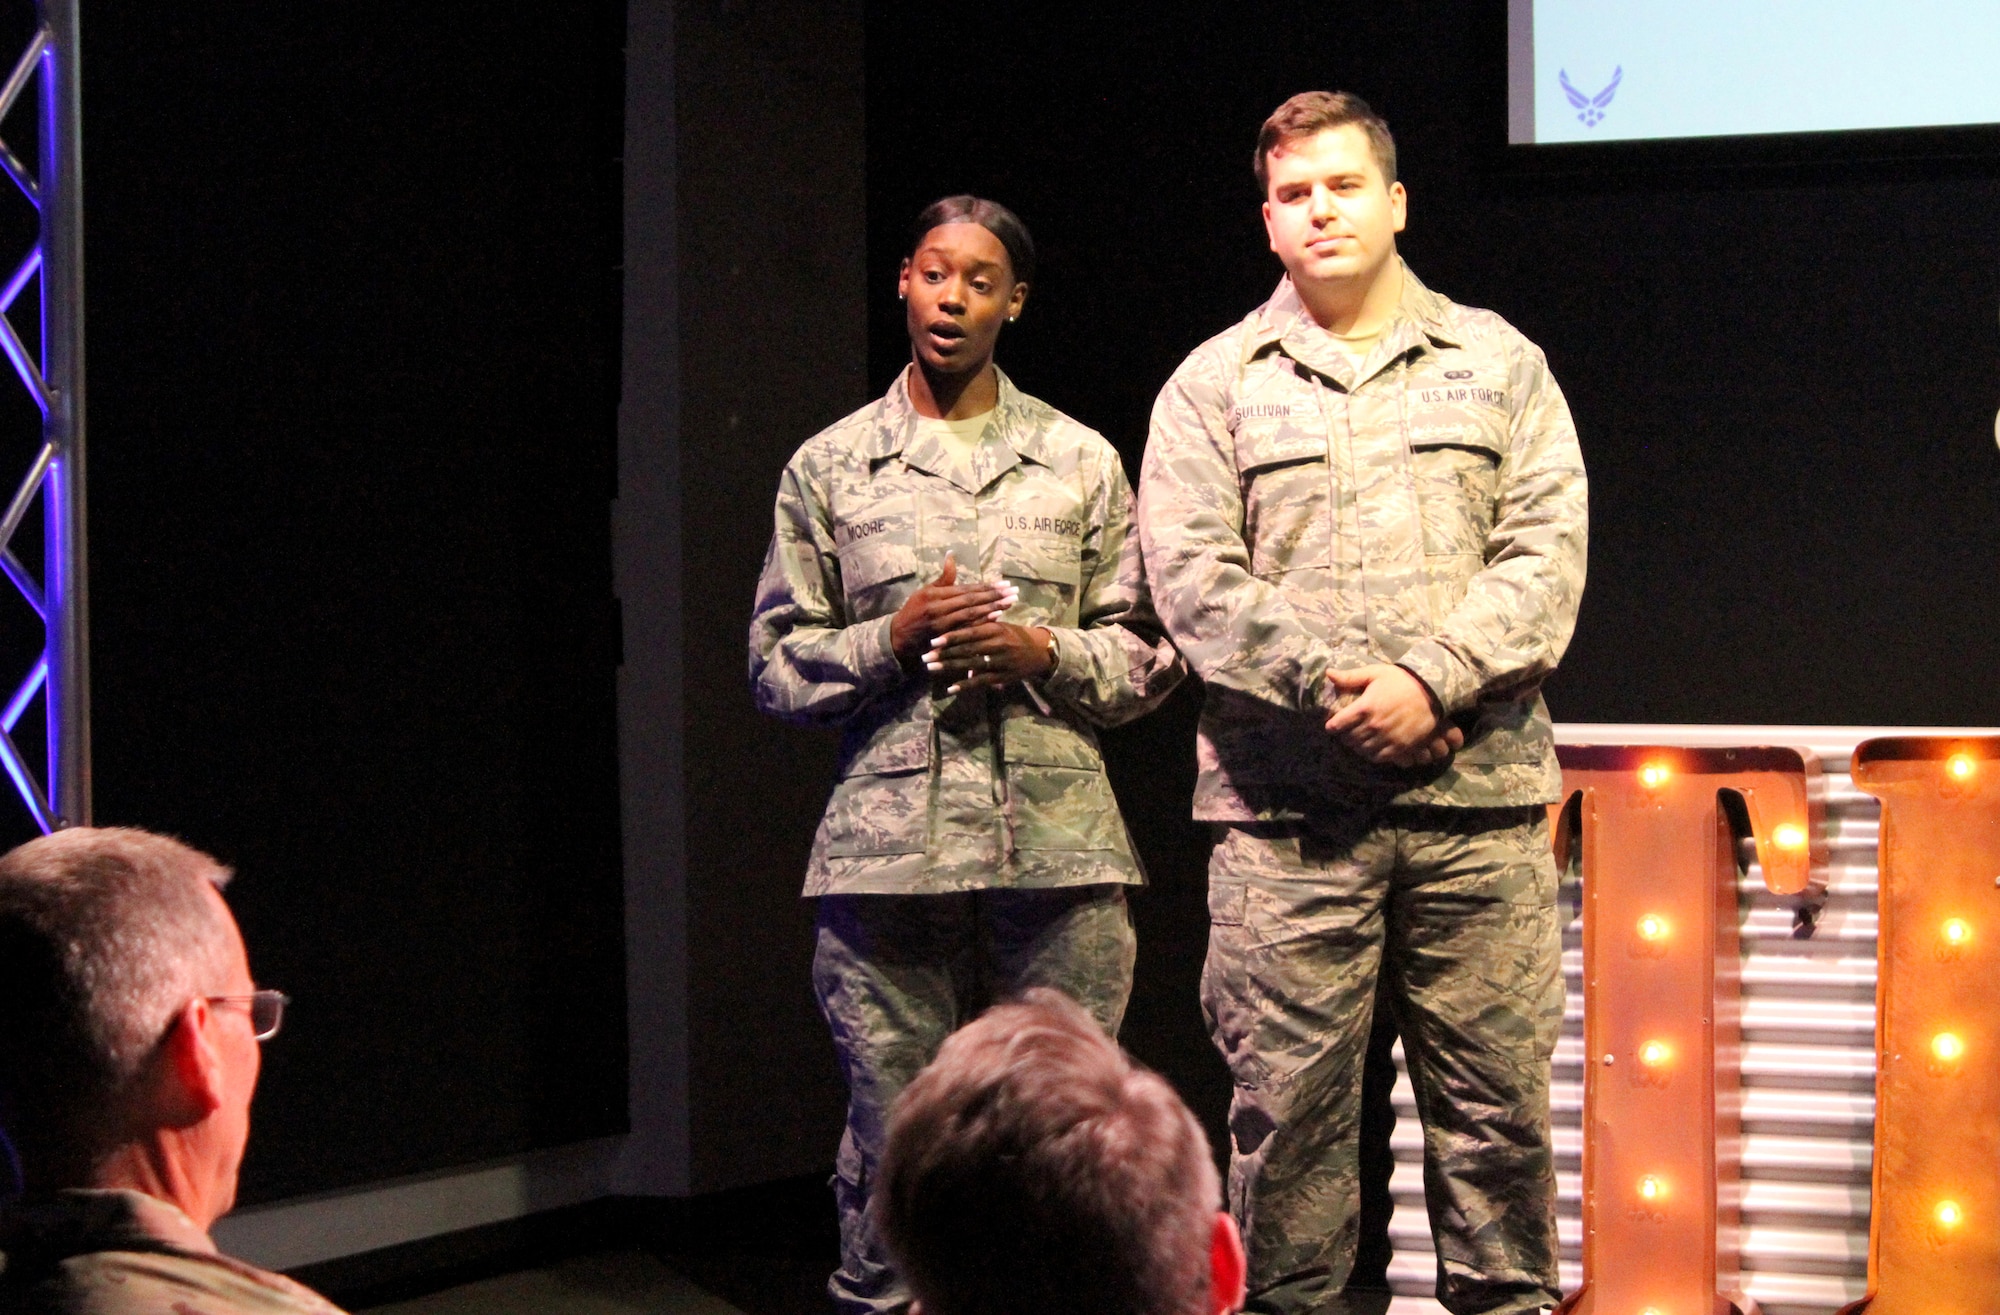 Second Lt. Thomas Sullivan and Senior Airman Ny’Daisha Moore present their idea for AF Eats, an app-based food order and delivery service, to senior leaders during the 2020 Air Force Installation and Mission Support Center Innovation Rodeo, Feb. 7, 2020, in San Antonio.